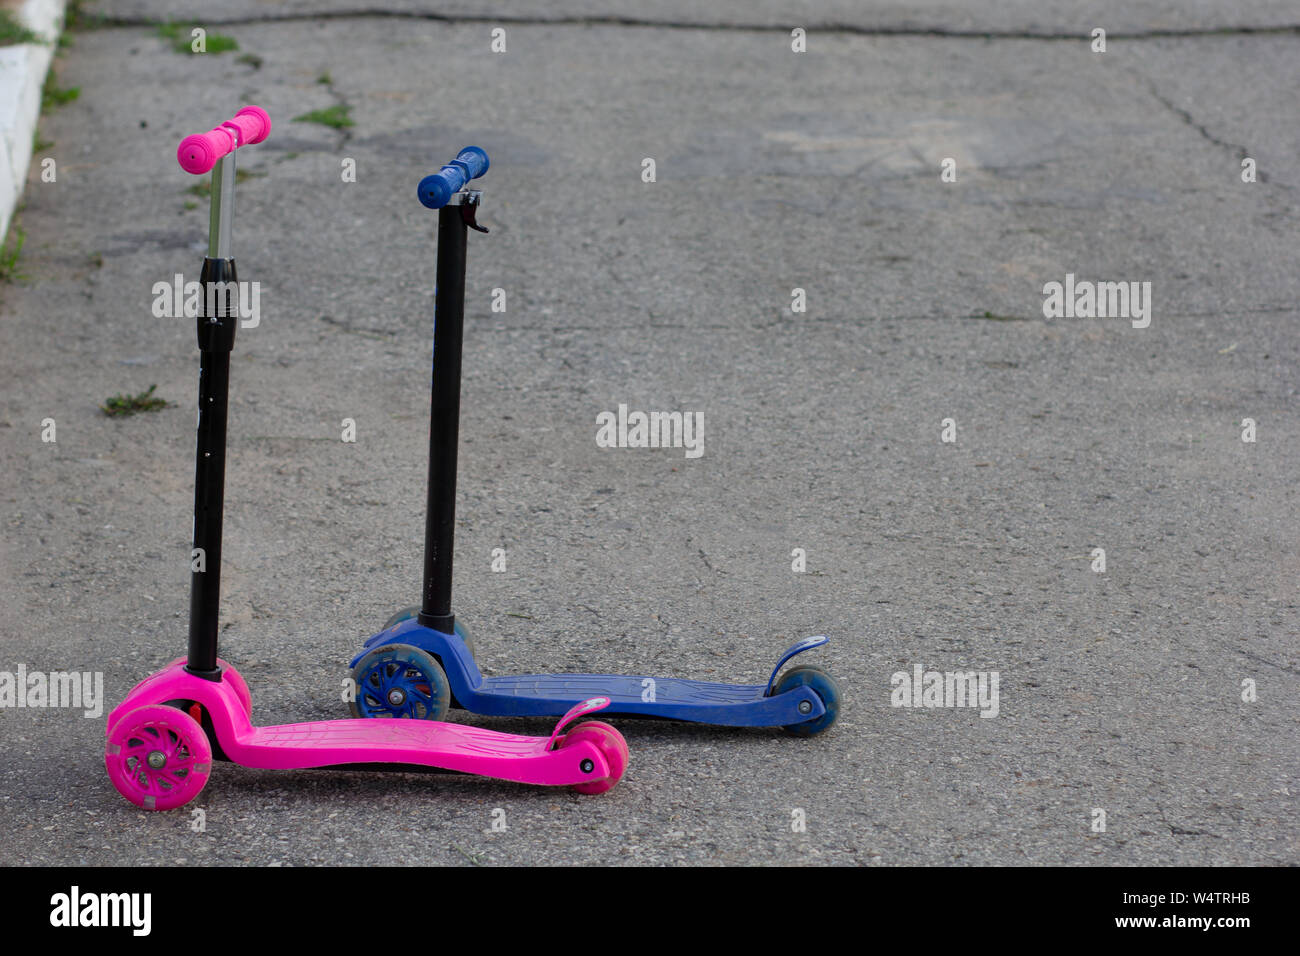 Two scooters without children, pink for girl, blue for boy on road Stock Photo